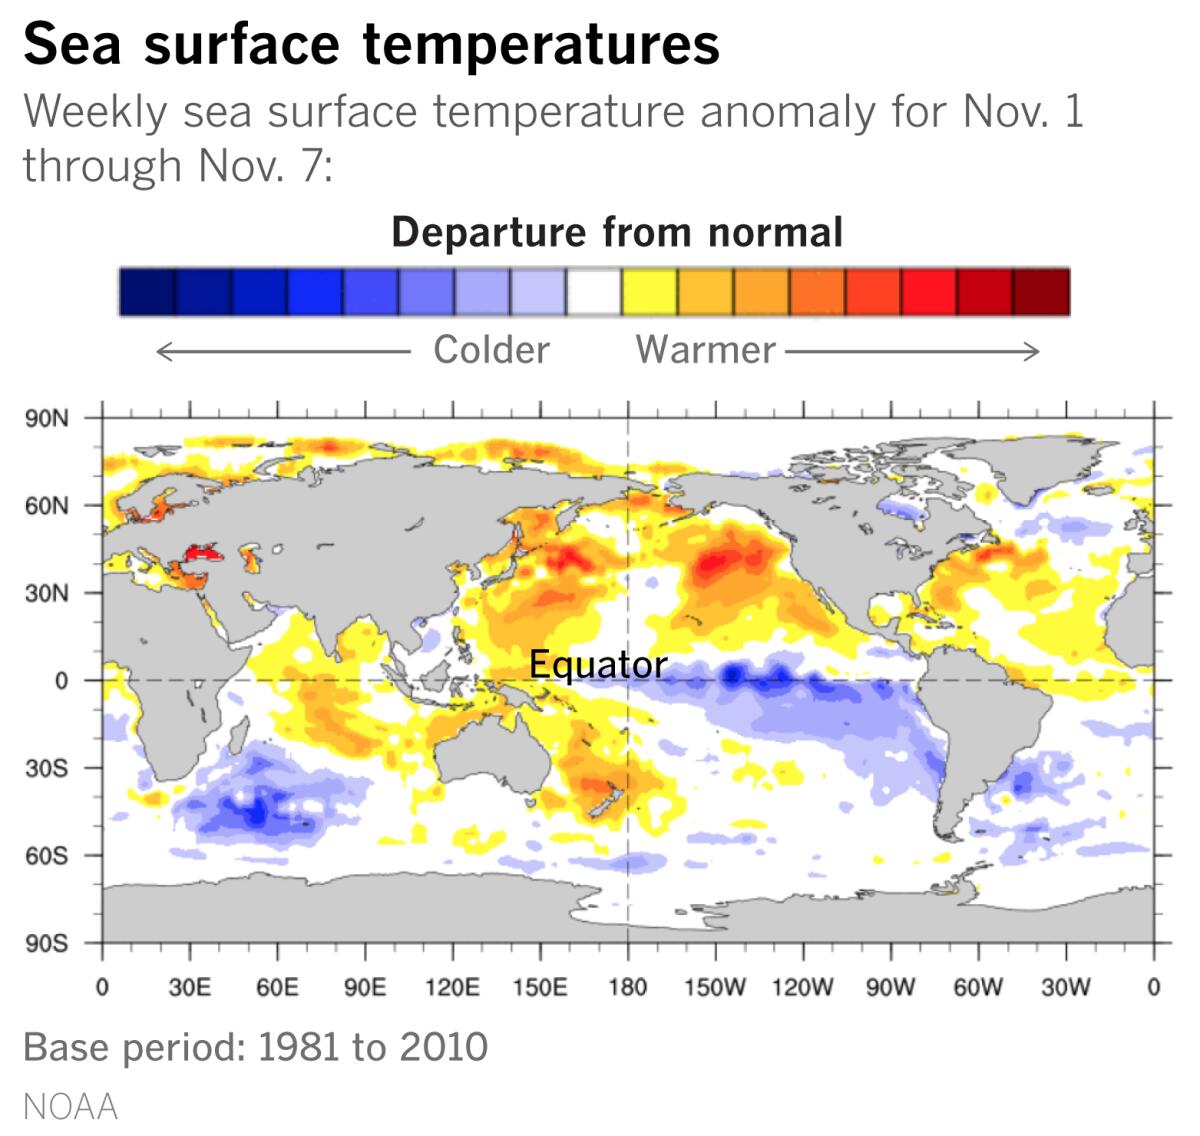 La Niña conditions are expected to last through the winter.